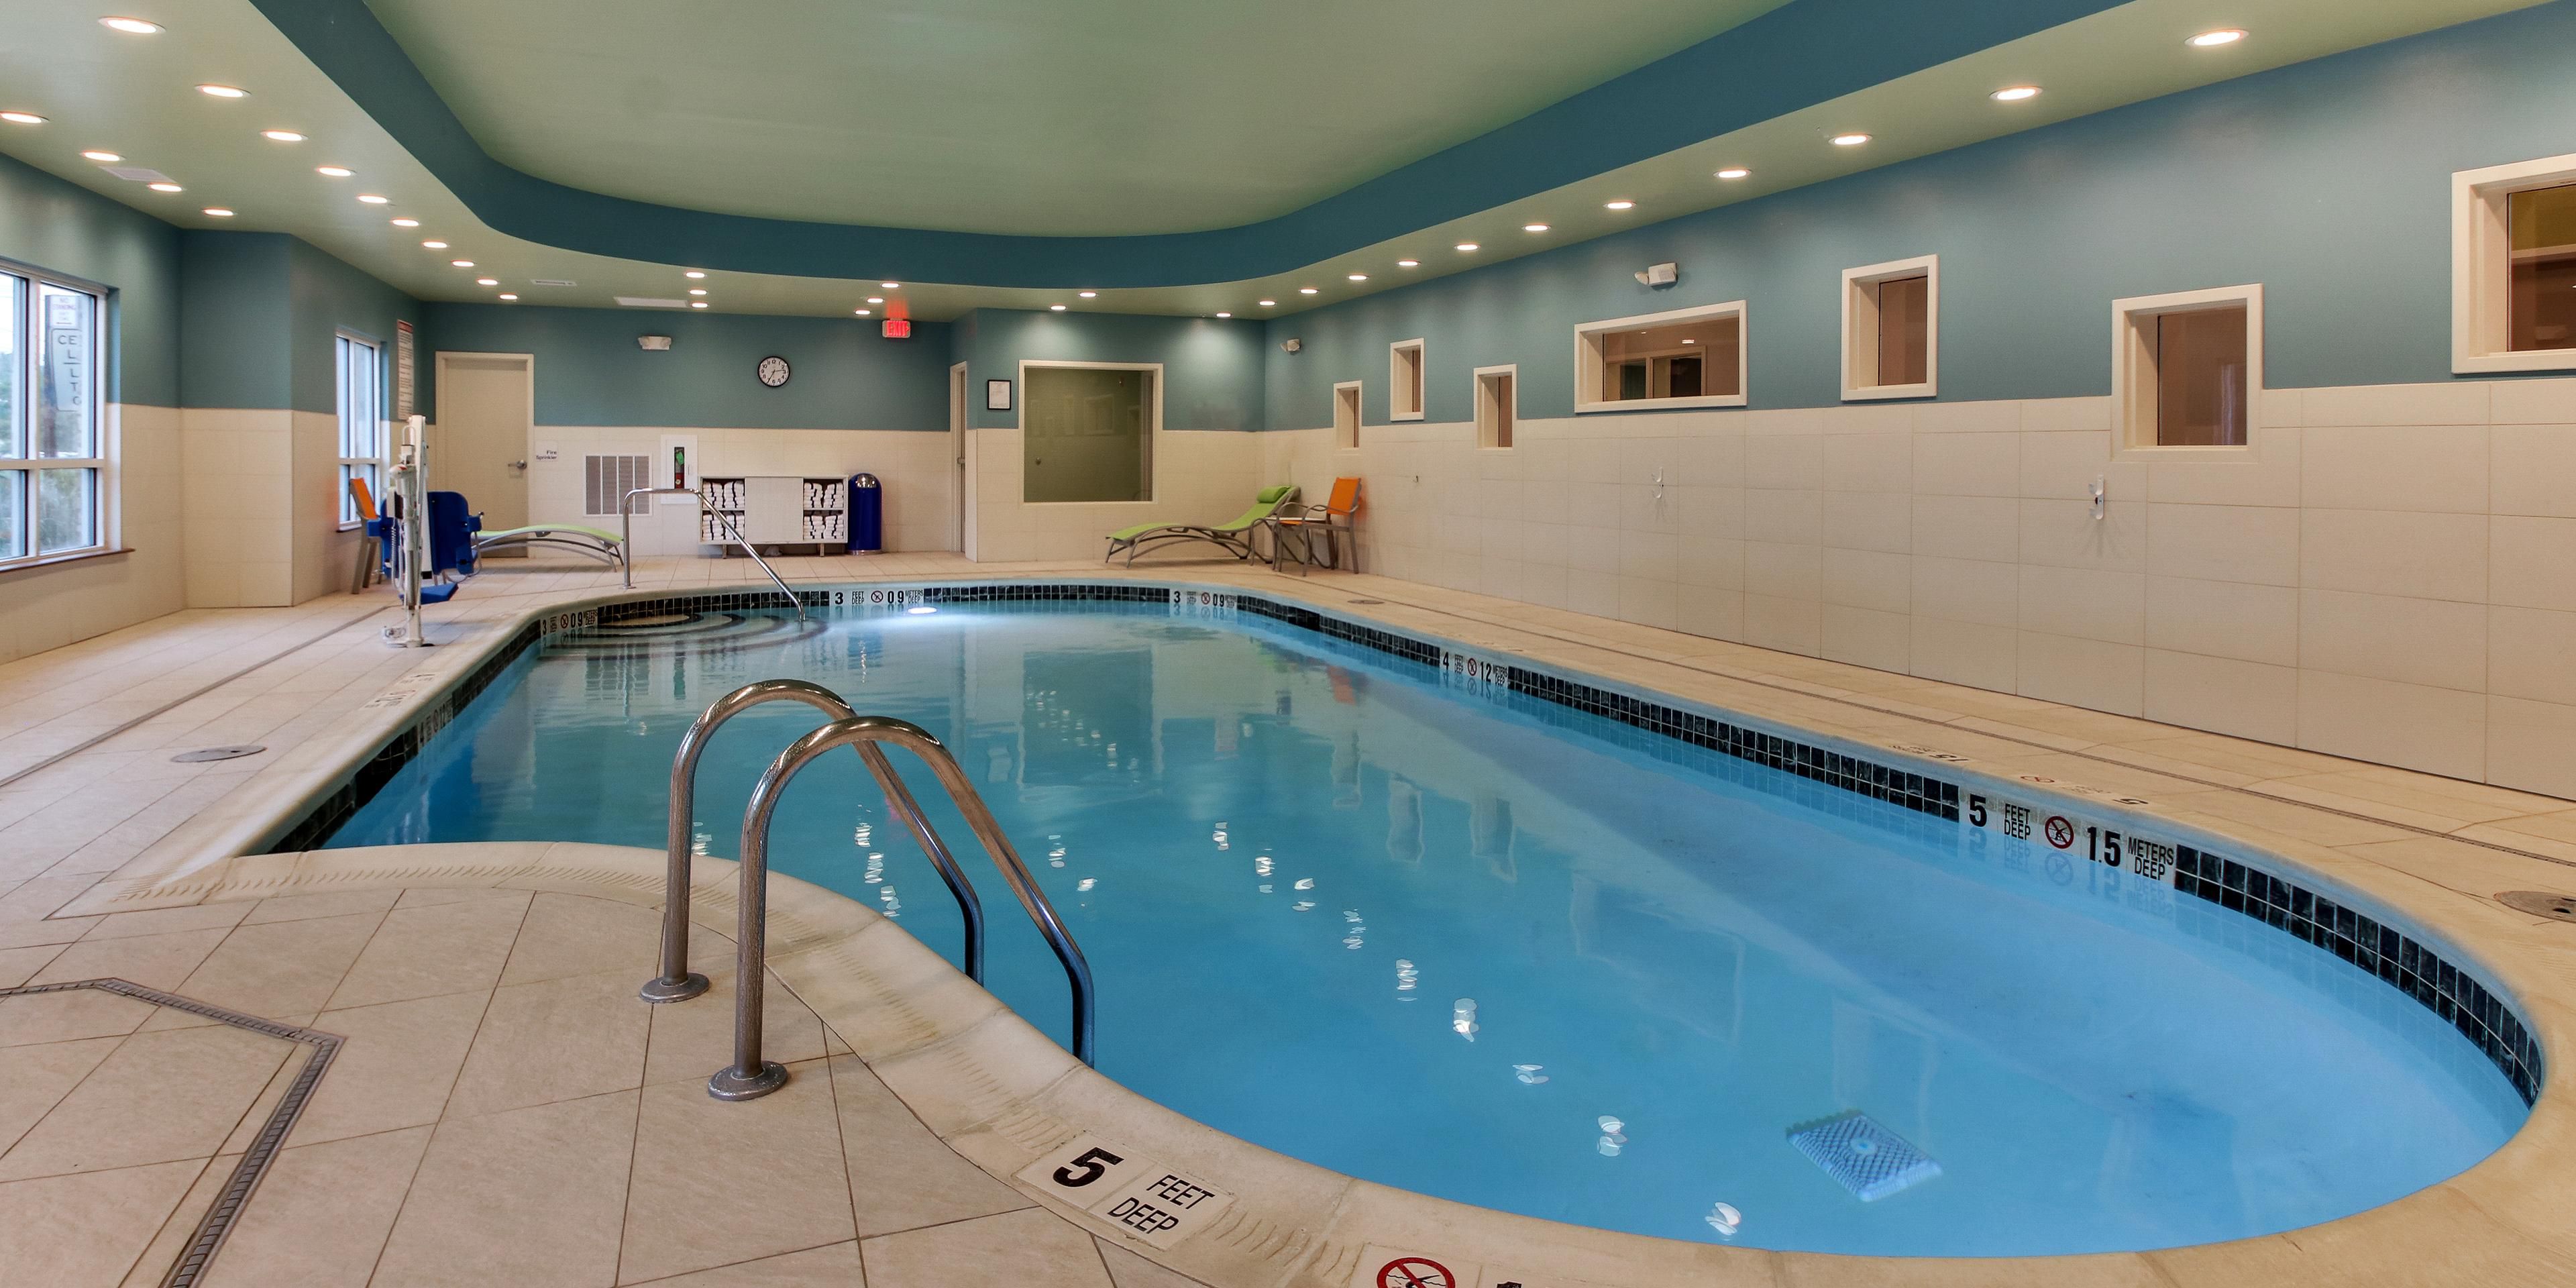 We are the only hotel in the area to have a Salt Water Pool!!
Stop in at the desk, as we are following all State & Local COVID guidelines for your safety!
Our Salt Water pool is designed to make any kid smile and business traveler unwind from an active day.